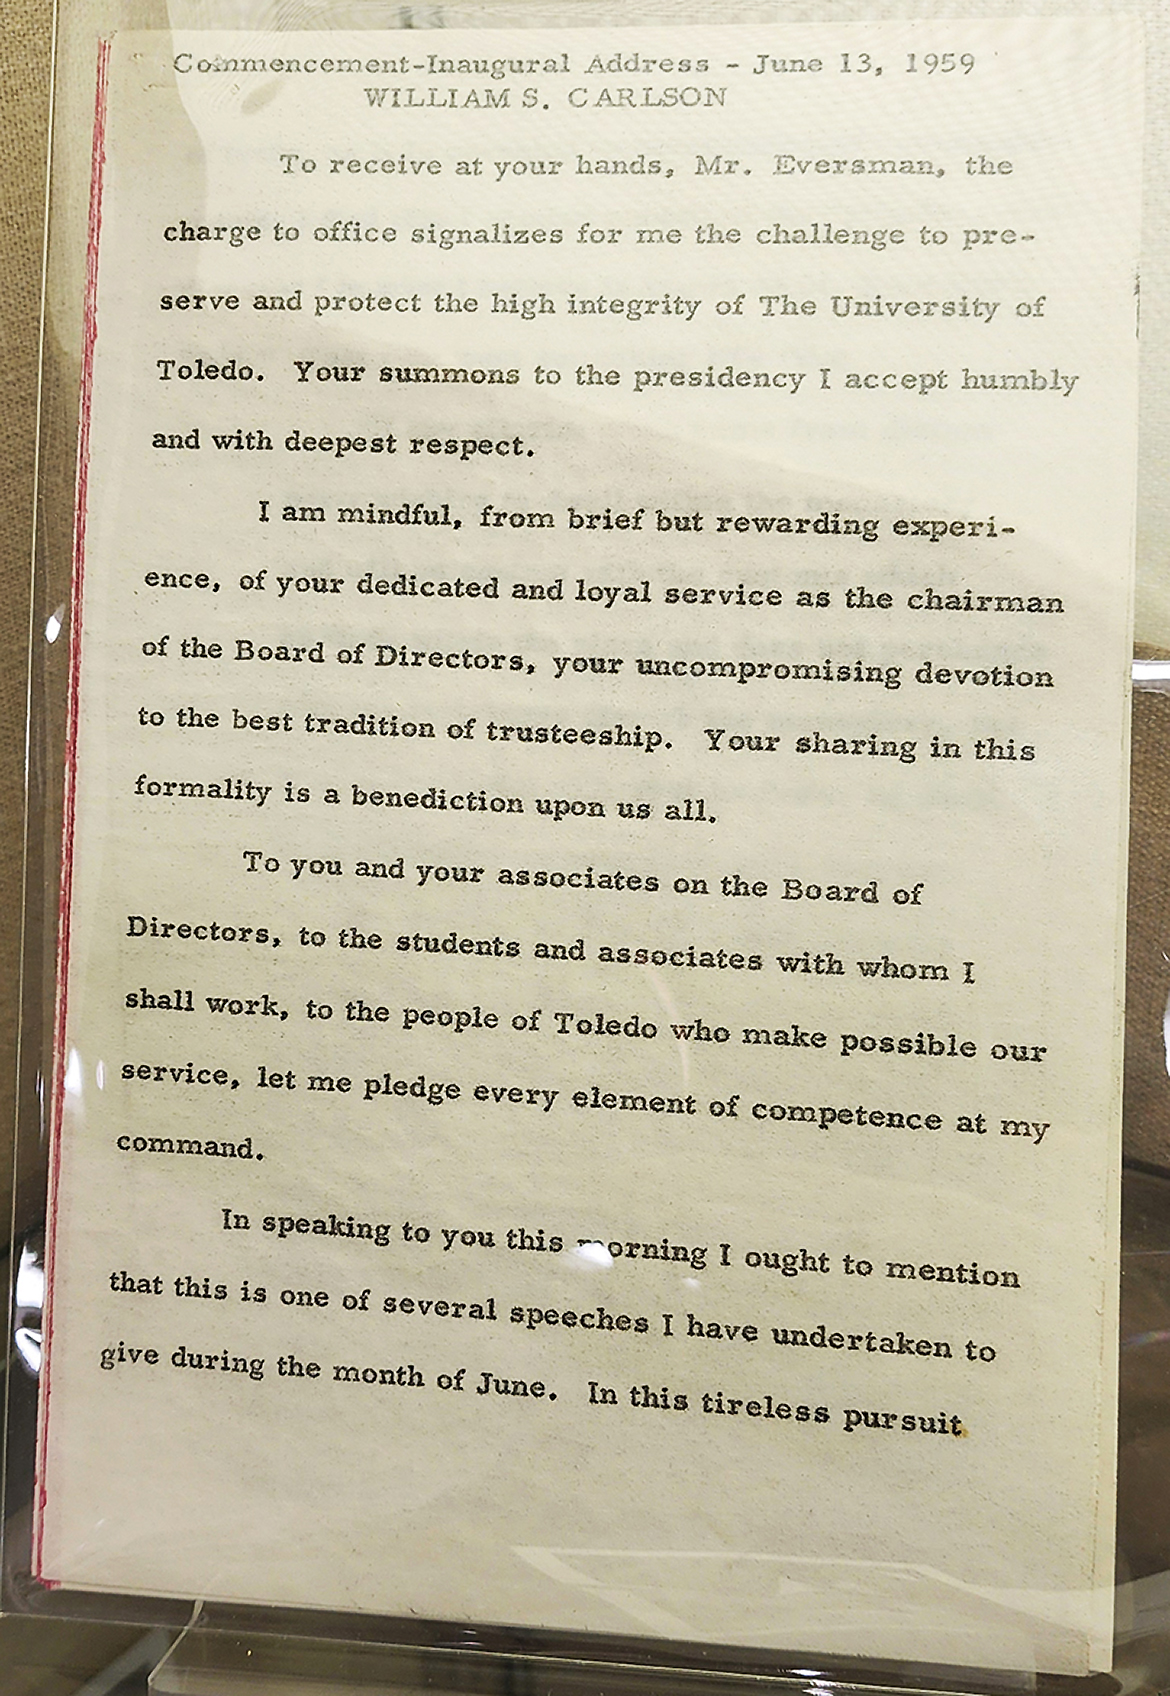 Commencement Inaugural Address - June 13, 1959, William S. Carlson